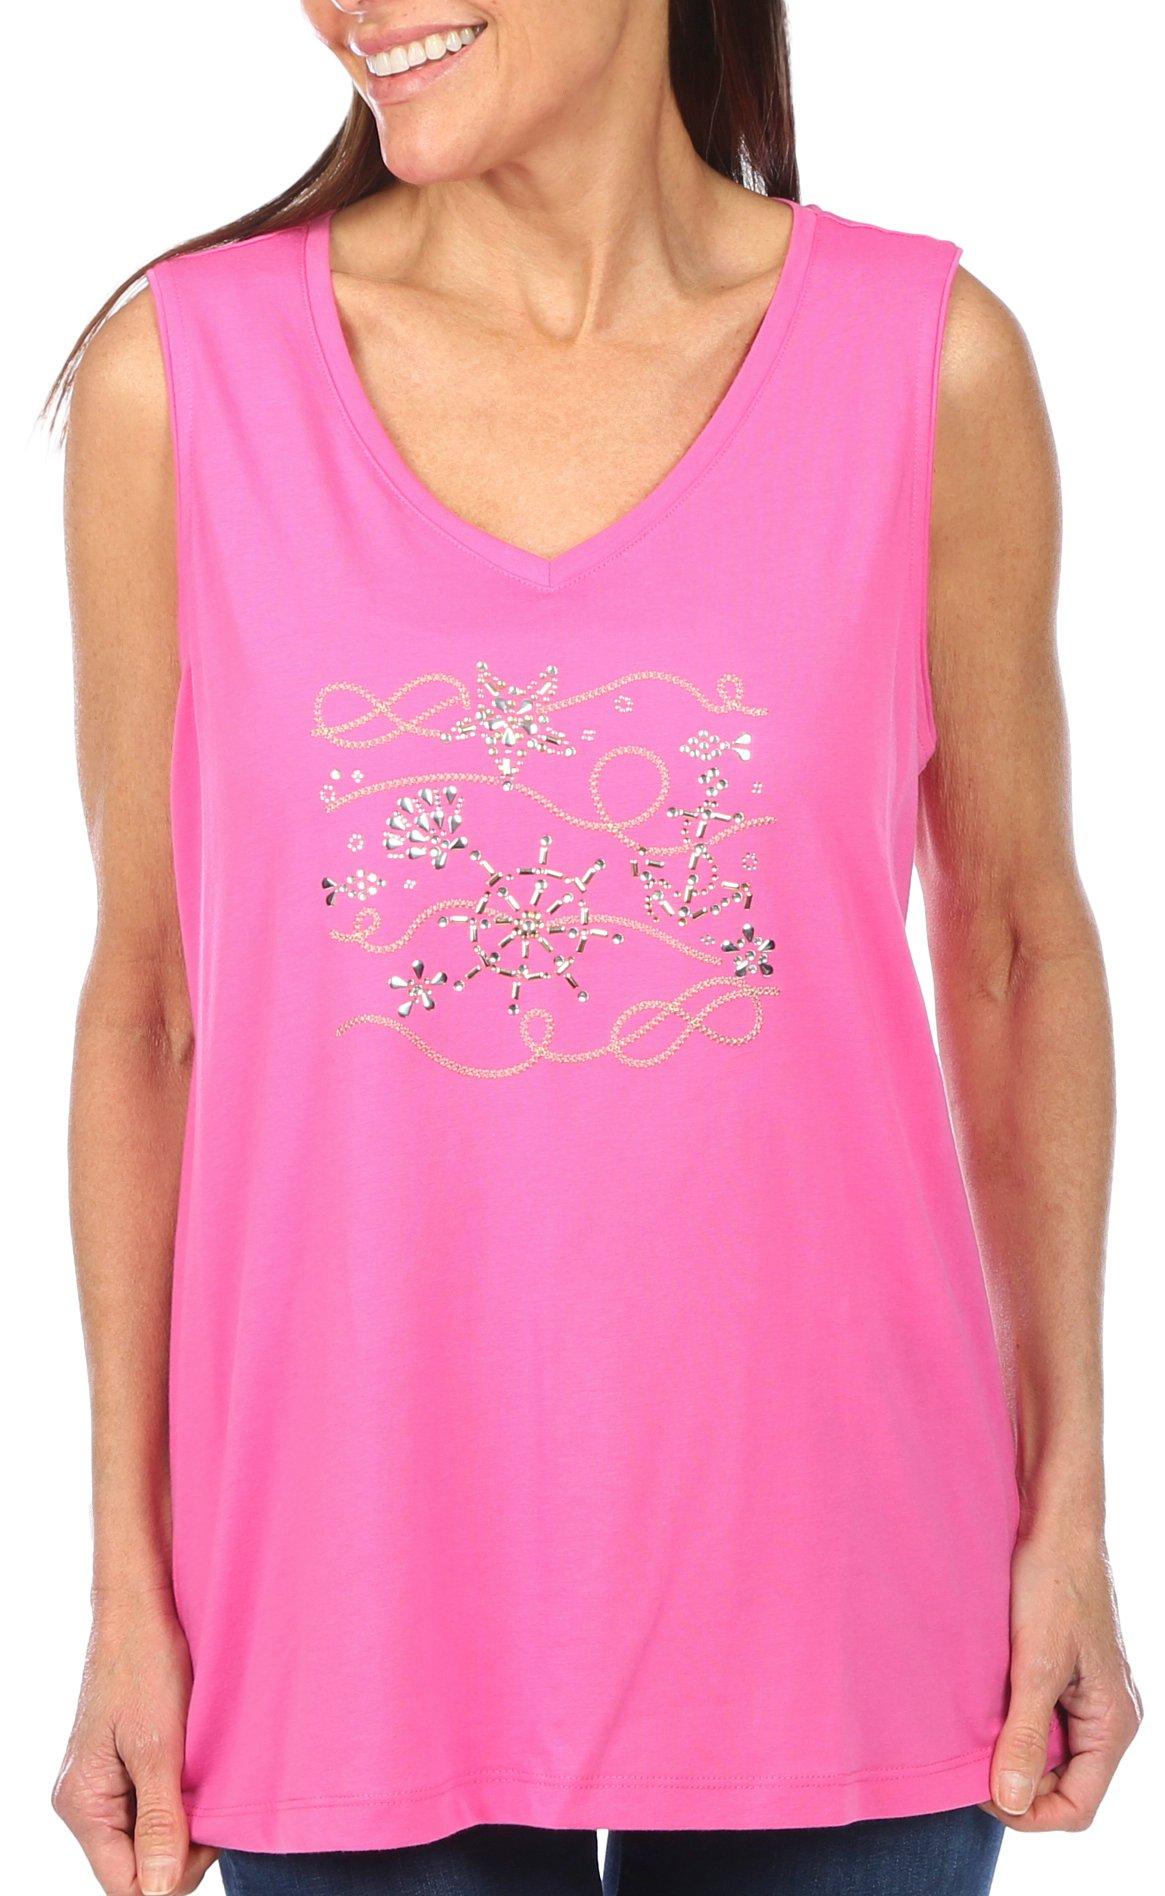 Coral Bay Womens Embellished Boat Lines Sleeveless Top